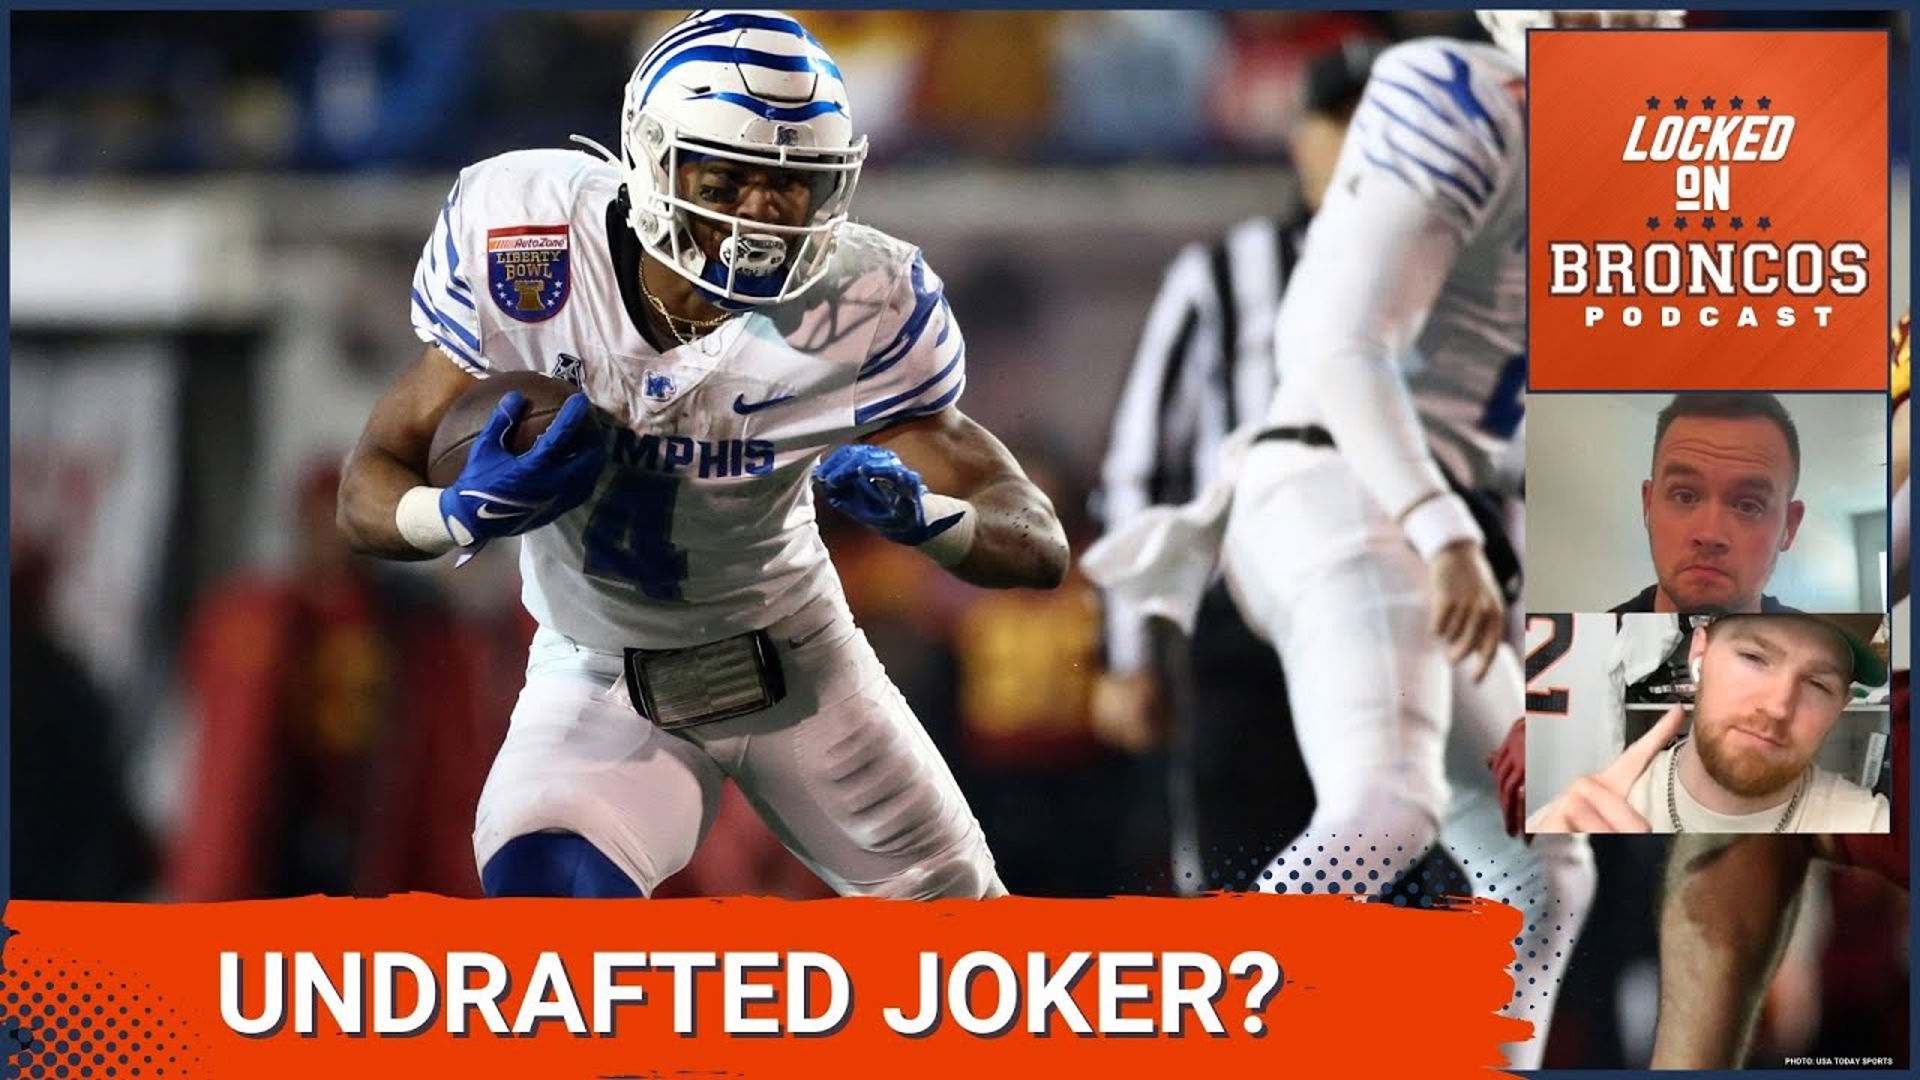 Denver Broncos Finalizing Undrafted Rookie Free Agents After NFL Draft cbs19.tv